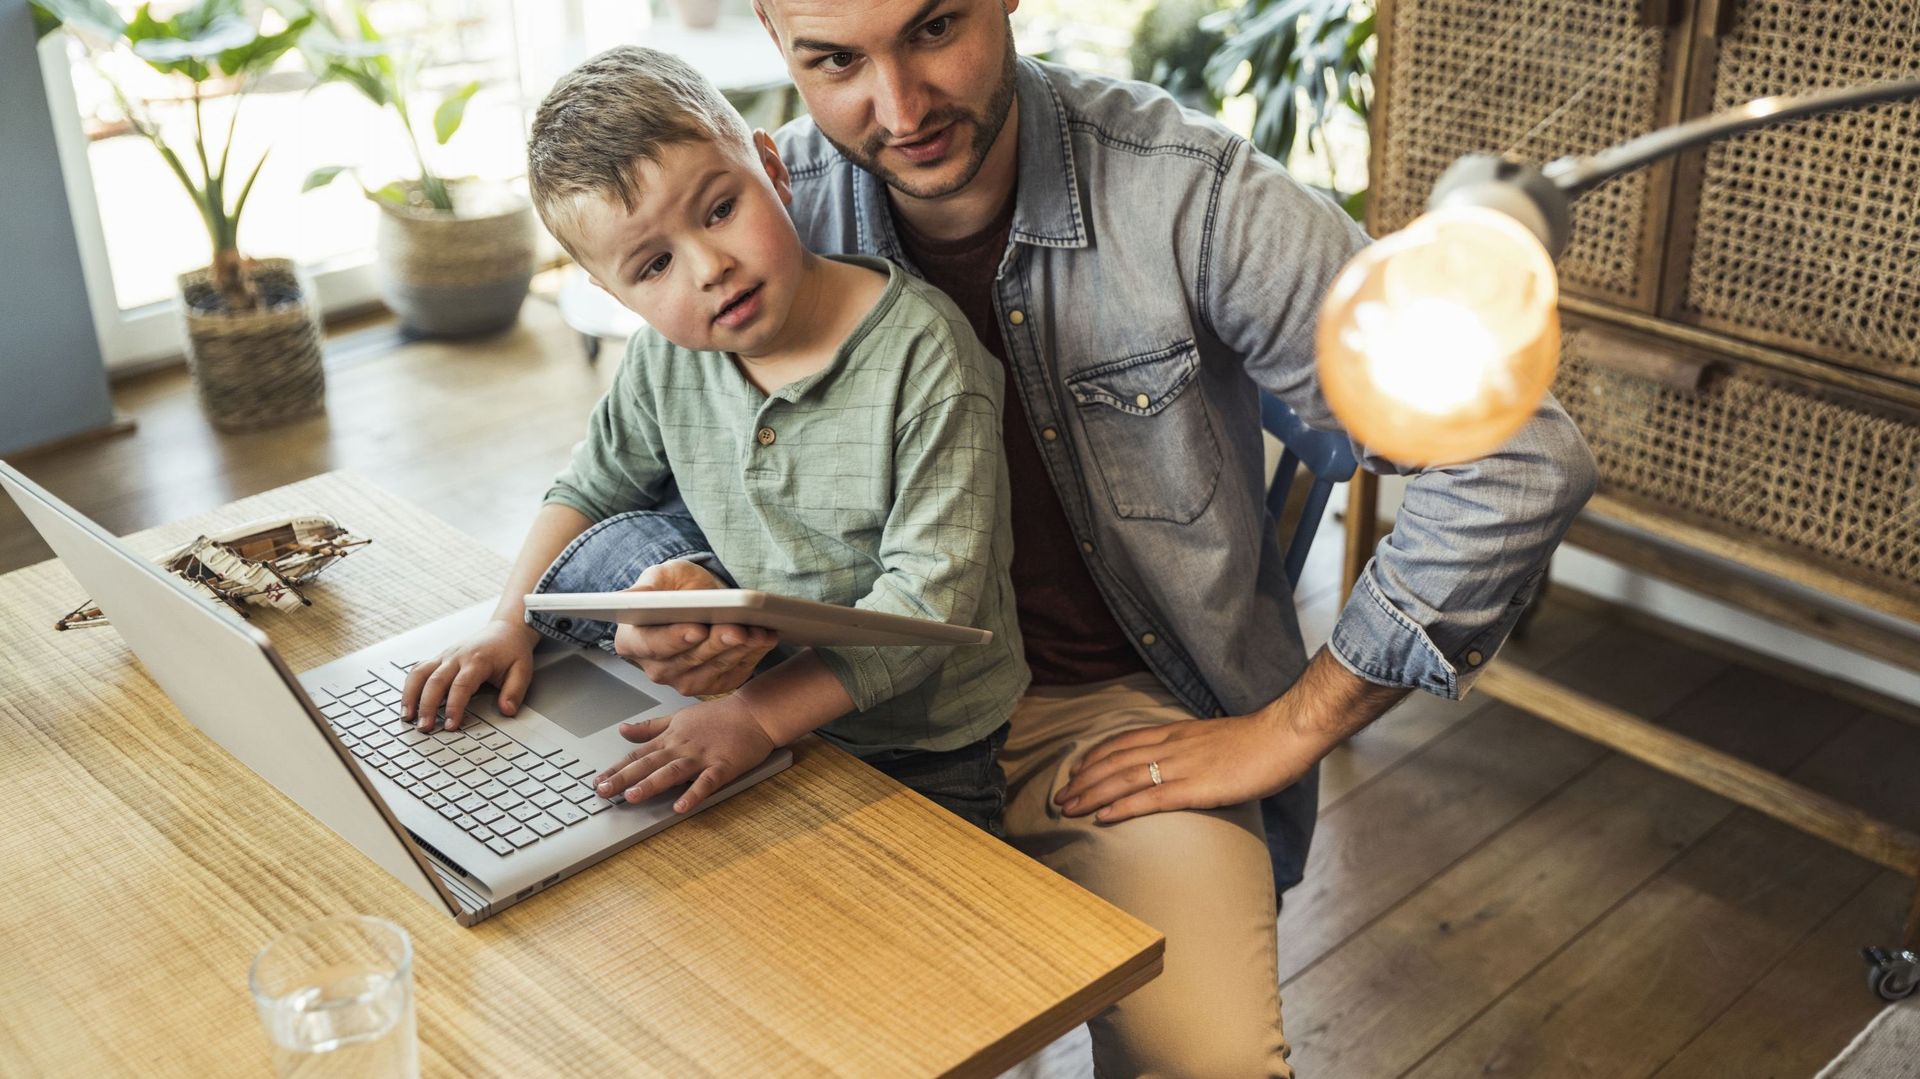 Man and child looking at burning lightbulb controlled by using tablet